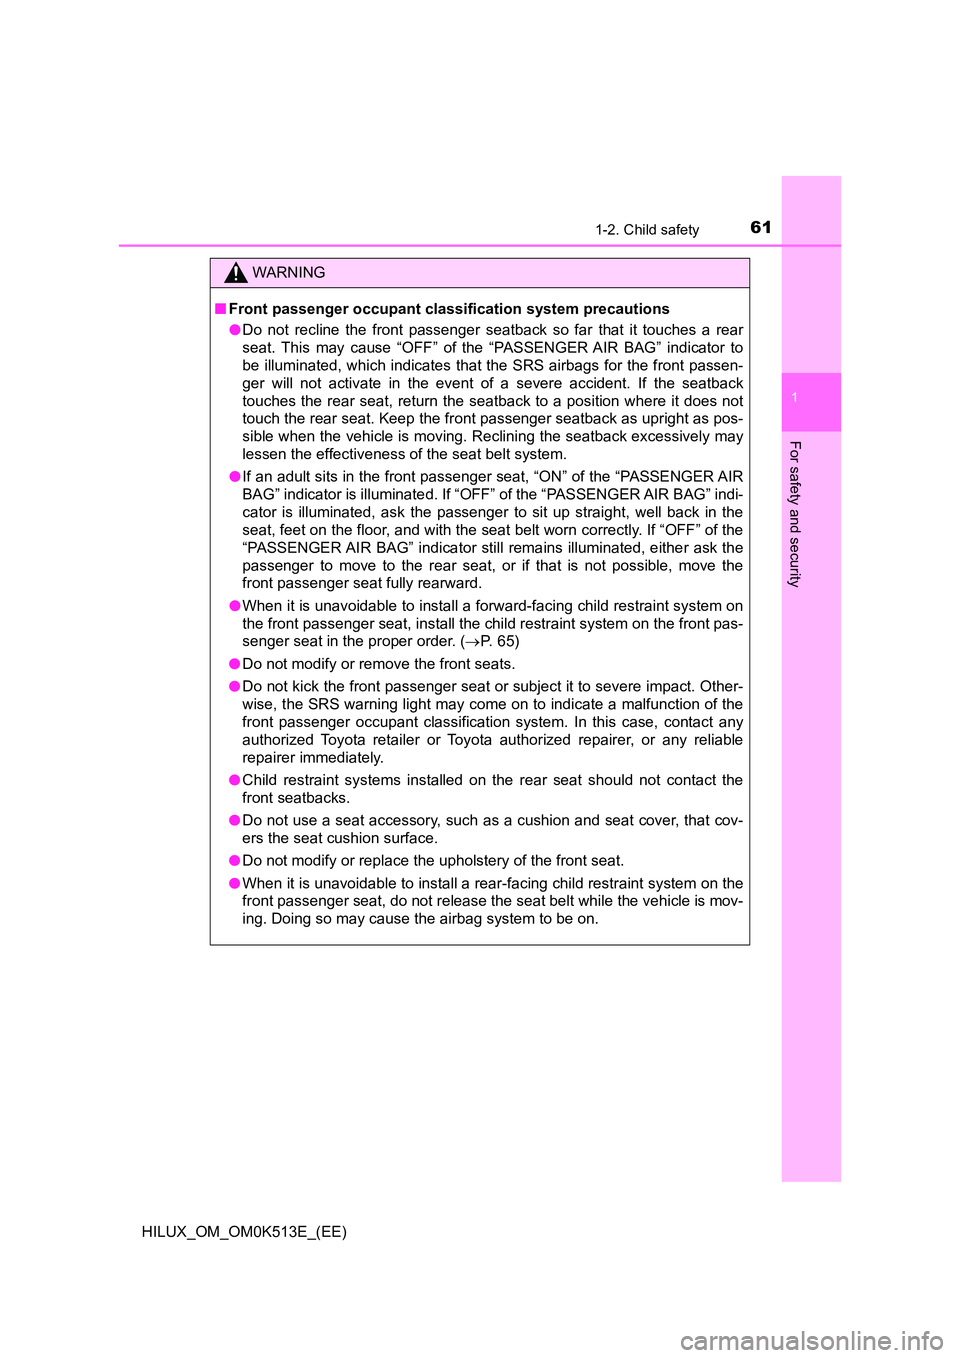 TOYOTA HILUX 2021  Owners Manual (in English) 611-2. Child safety
1
HILUX_OM_OM0K513E_(EE)
For safety and security
WARNING
�QFront passenger occupant classification system precautions 
�O Do not recline the front passenger seatback so far that it